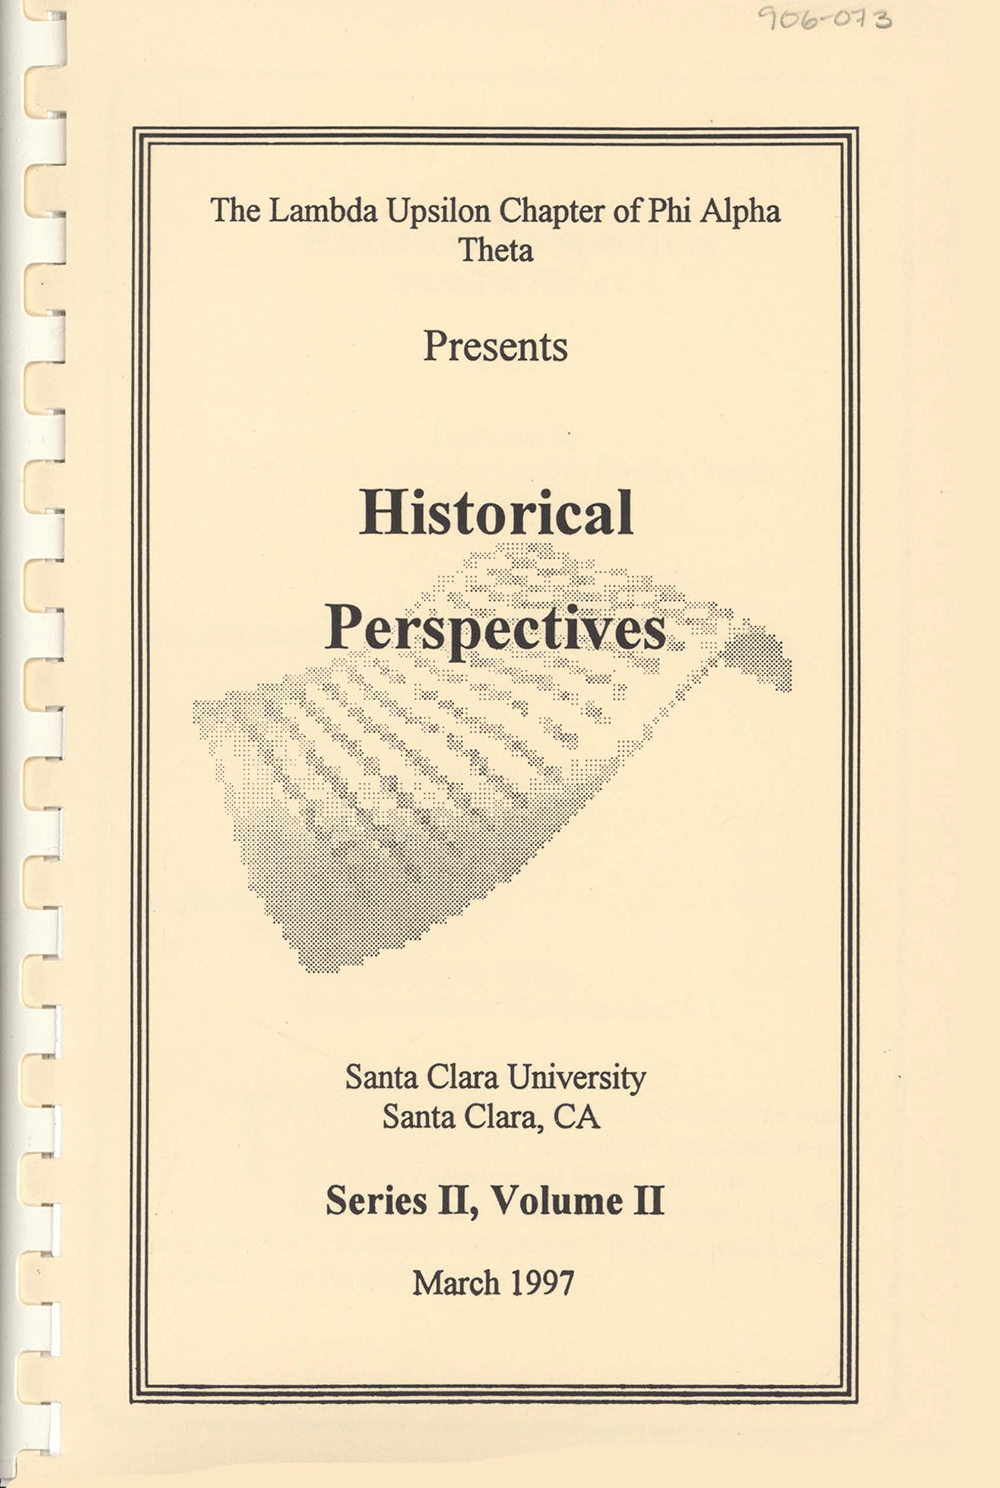 Historical Perspectives 1997, volume 2